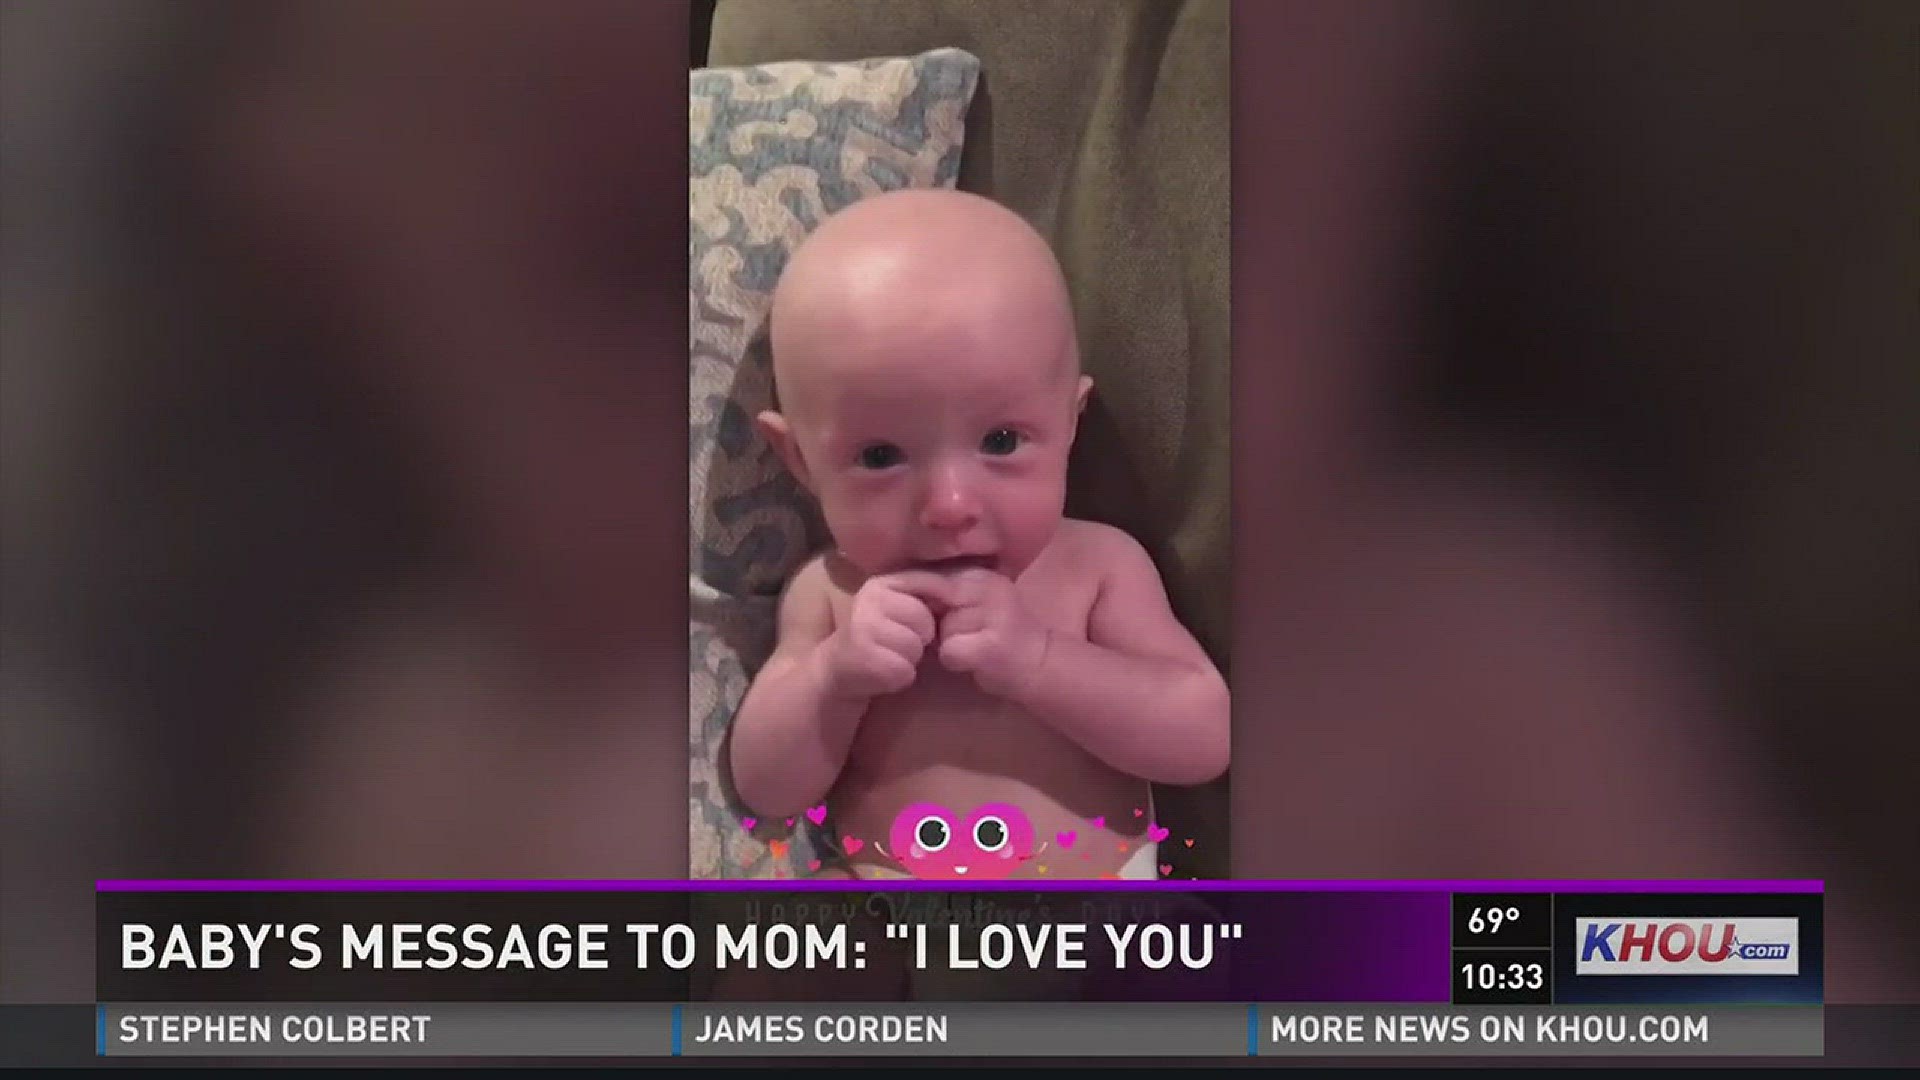 Little 4-month-old Kade from La Marque seems to say, "I love you!" to his mom.